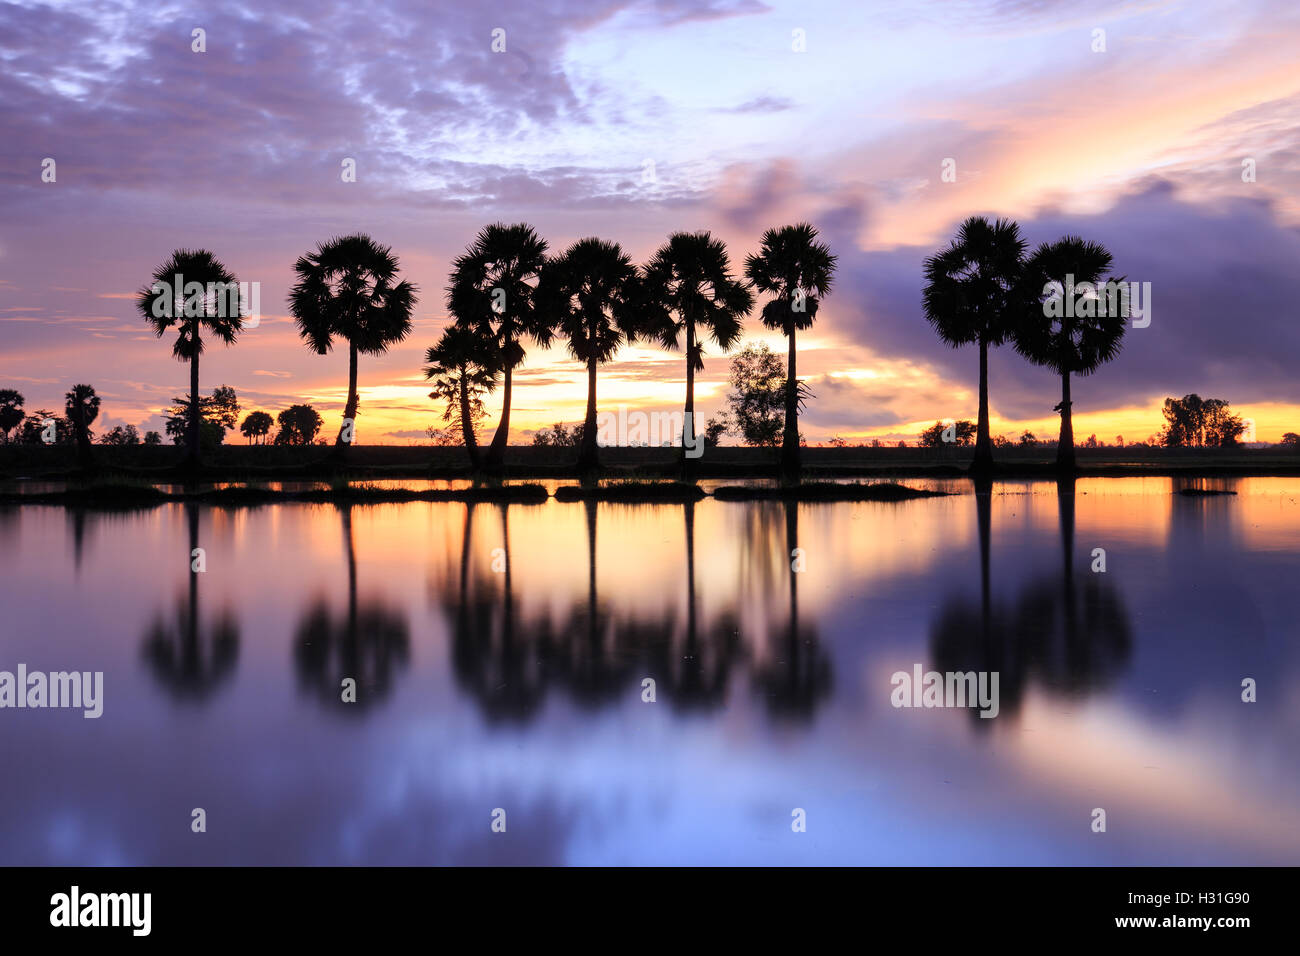 Colorful sunrise landscape with silhouettes of palm trees on Chau Doc city, Vietnam. Stock Photo